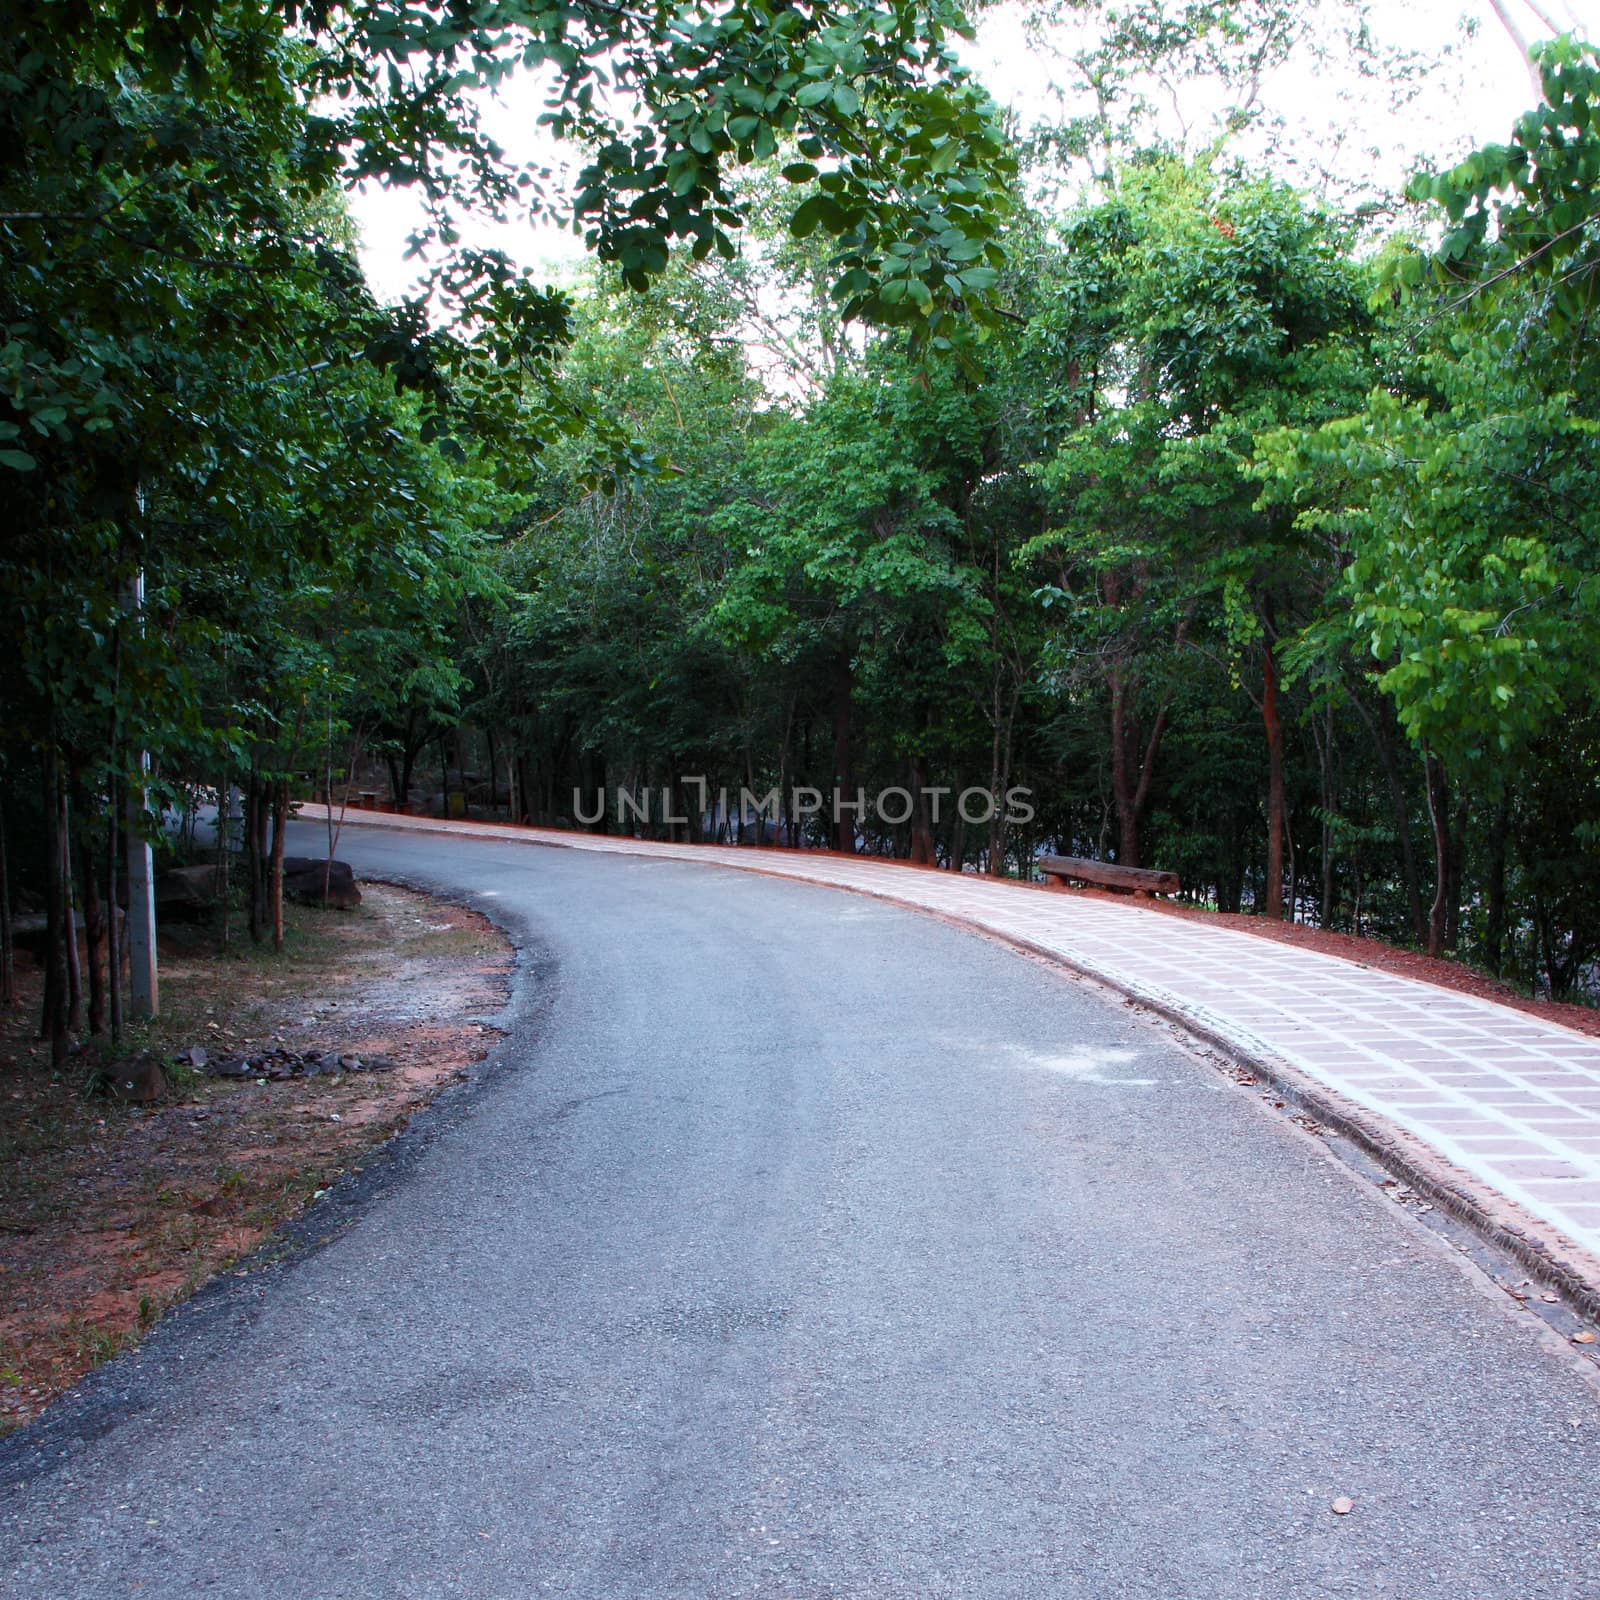 curved road with trees on both sides by geargodz